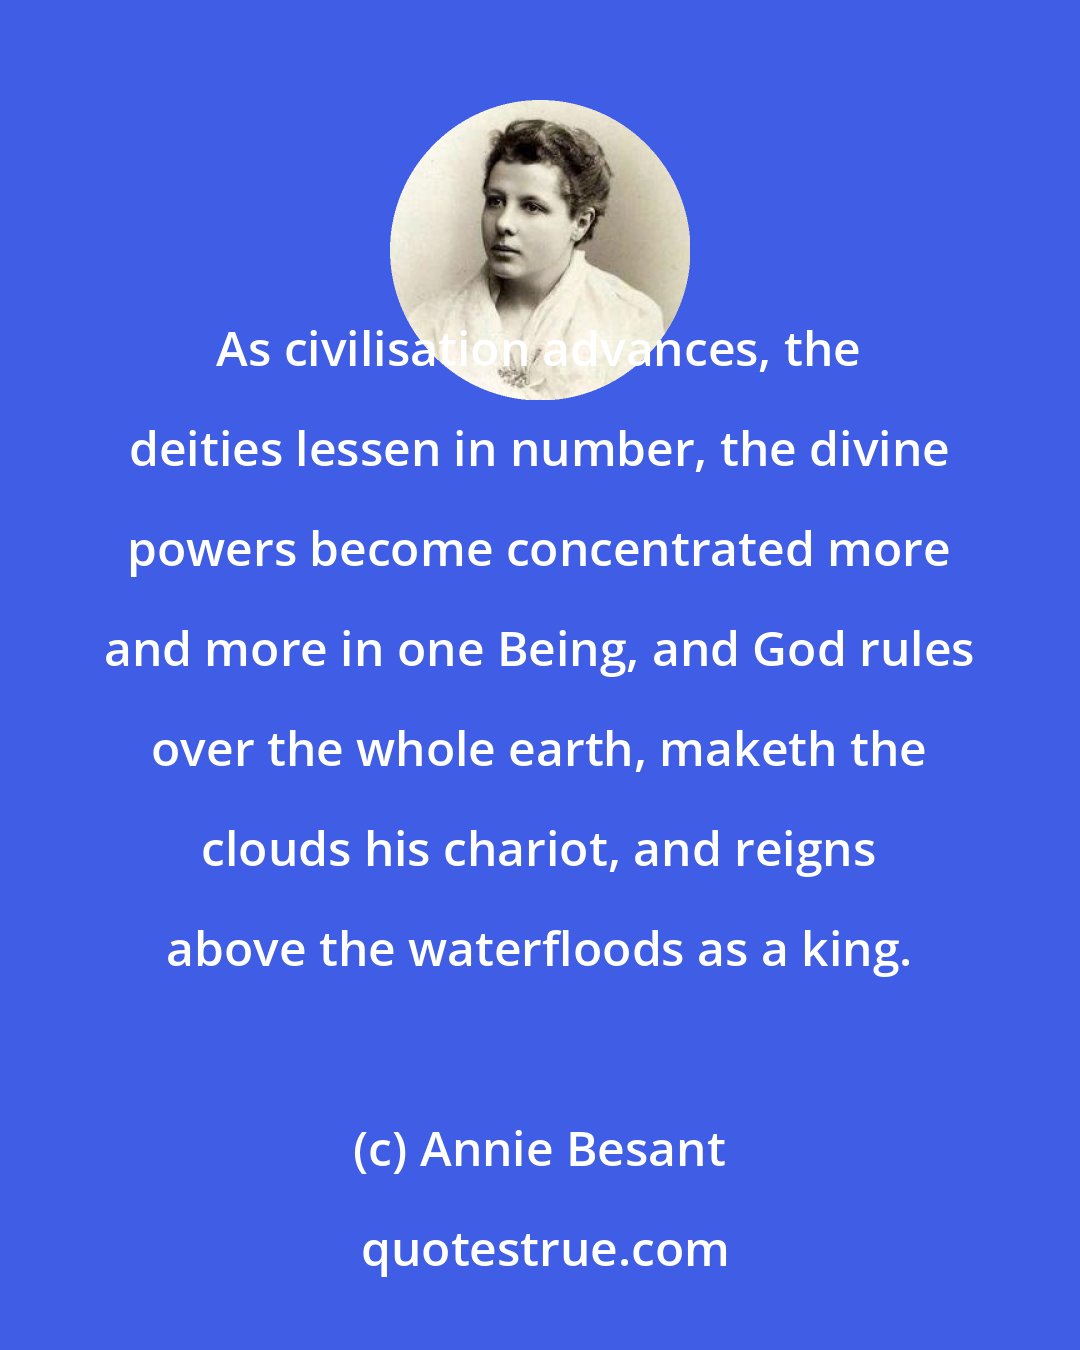 Annie Besant: As civilisation advances, the deities lessen in number, the divine powers become concentrated more and more in one Being, and God rules over the whole earth, maketh the clouds his chariot, and reigns above the waterfloods as a king.